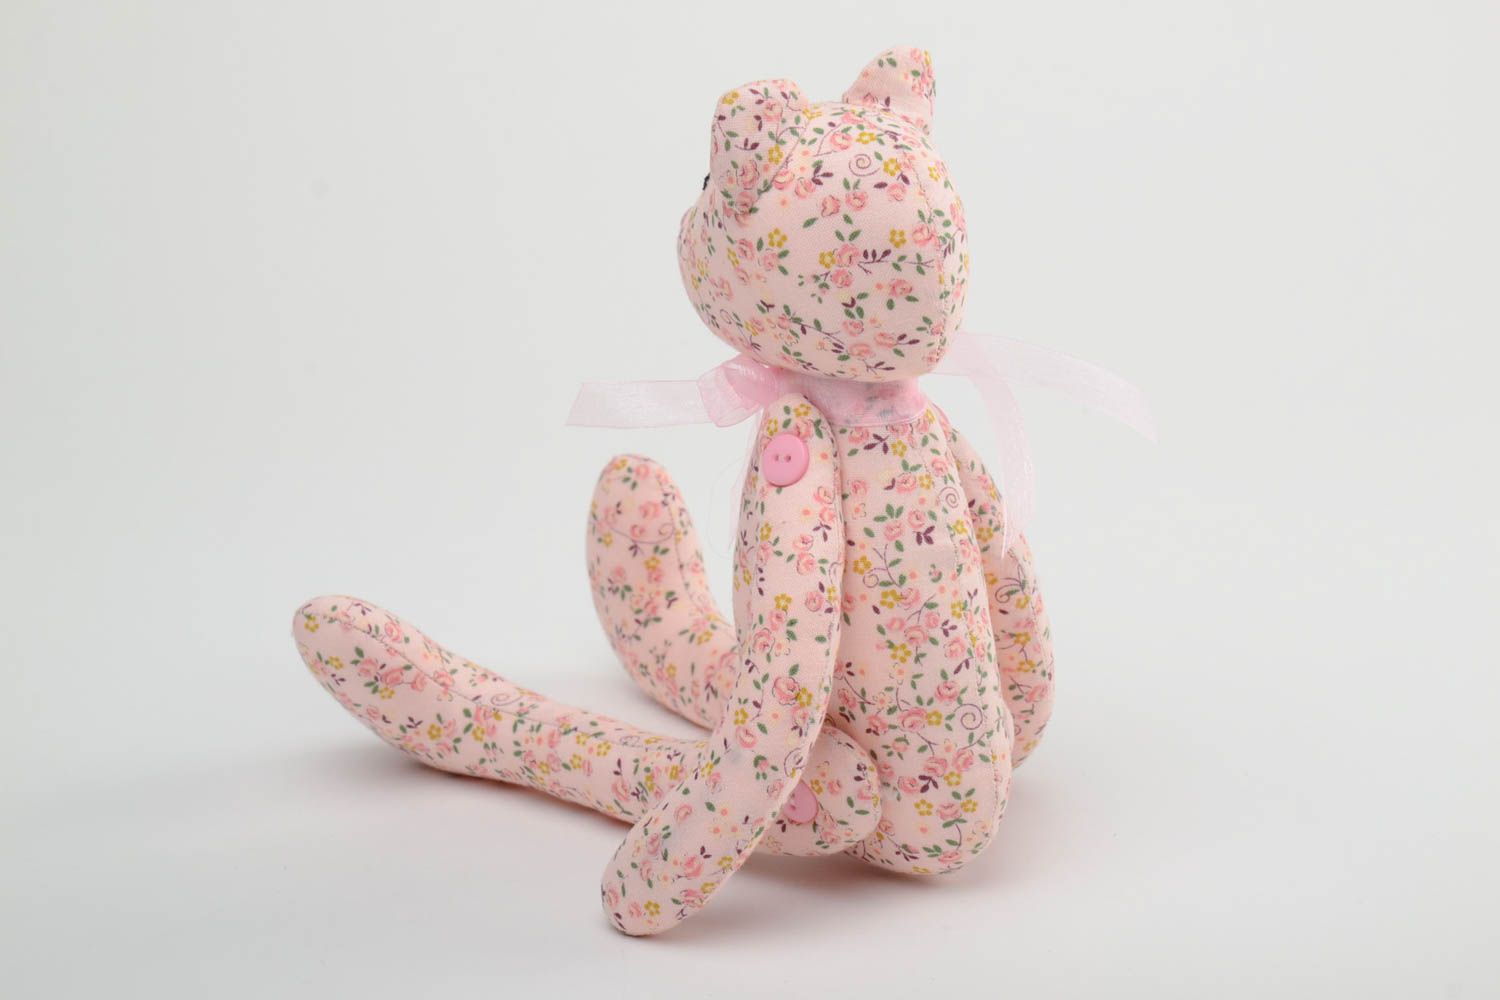 Handmade designer soft toy sewn of tender pink floral cotton fabric bear photo 4